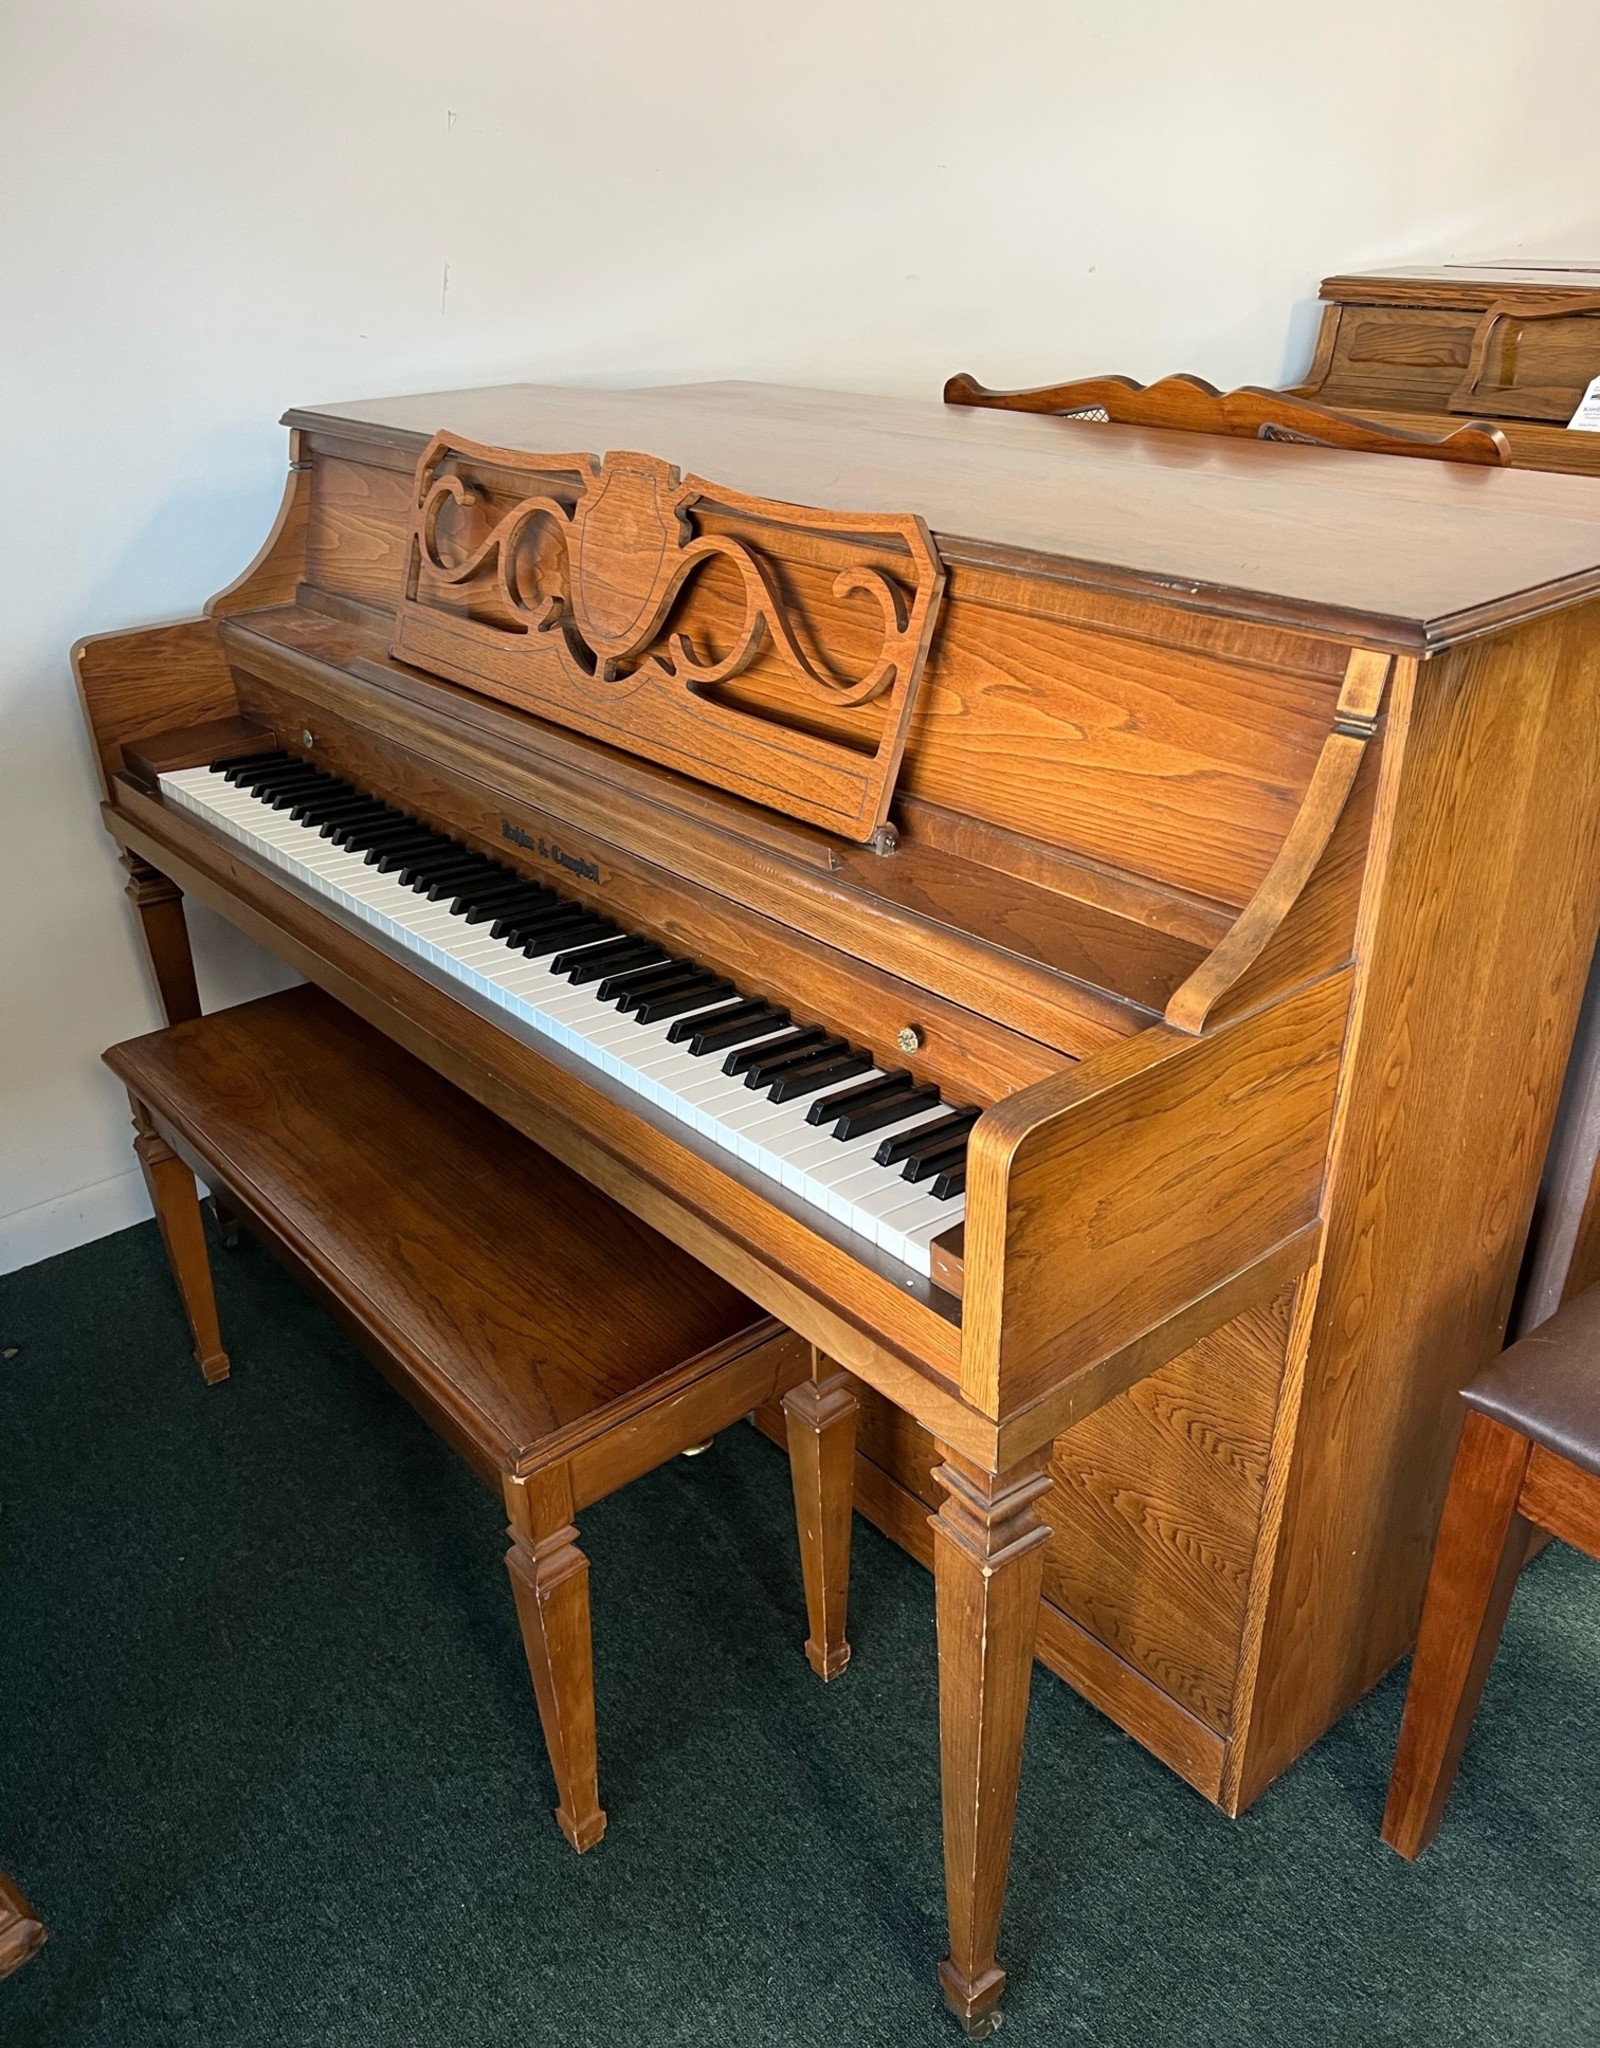 Kohler & Campbell Kohler & Campbell Console Piano (Pre-Owned)